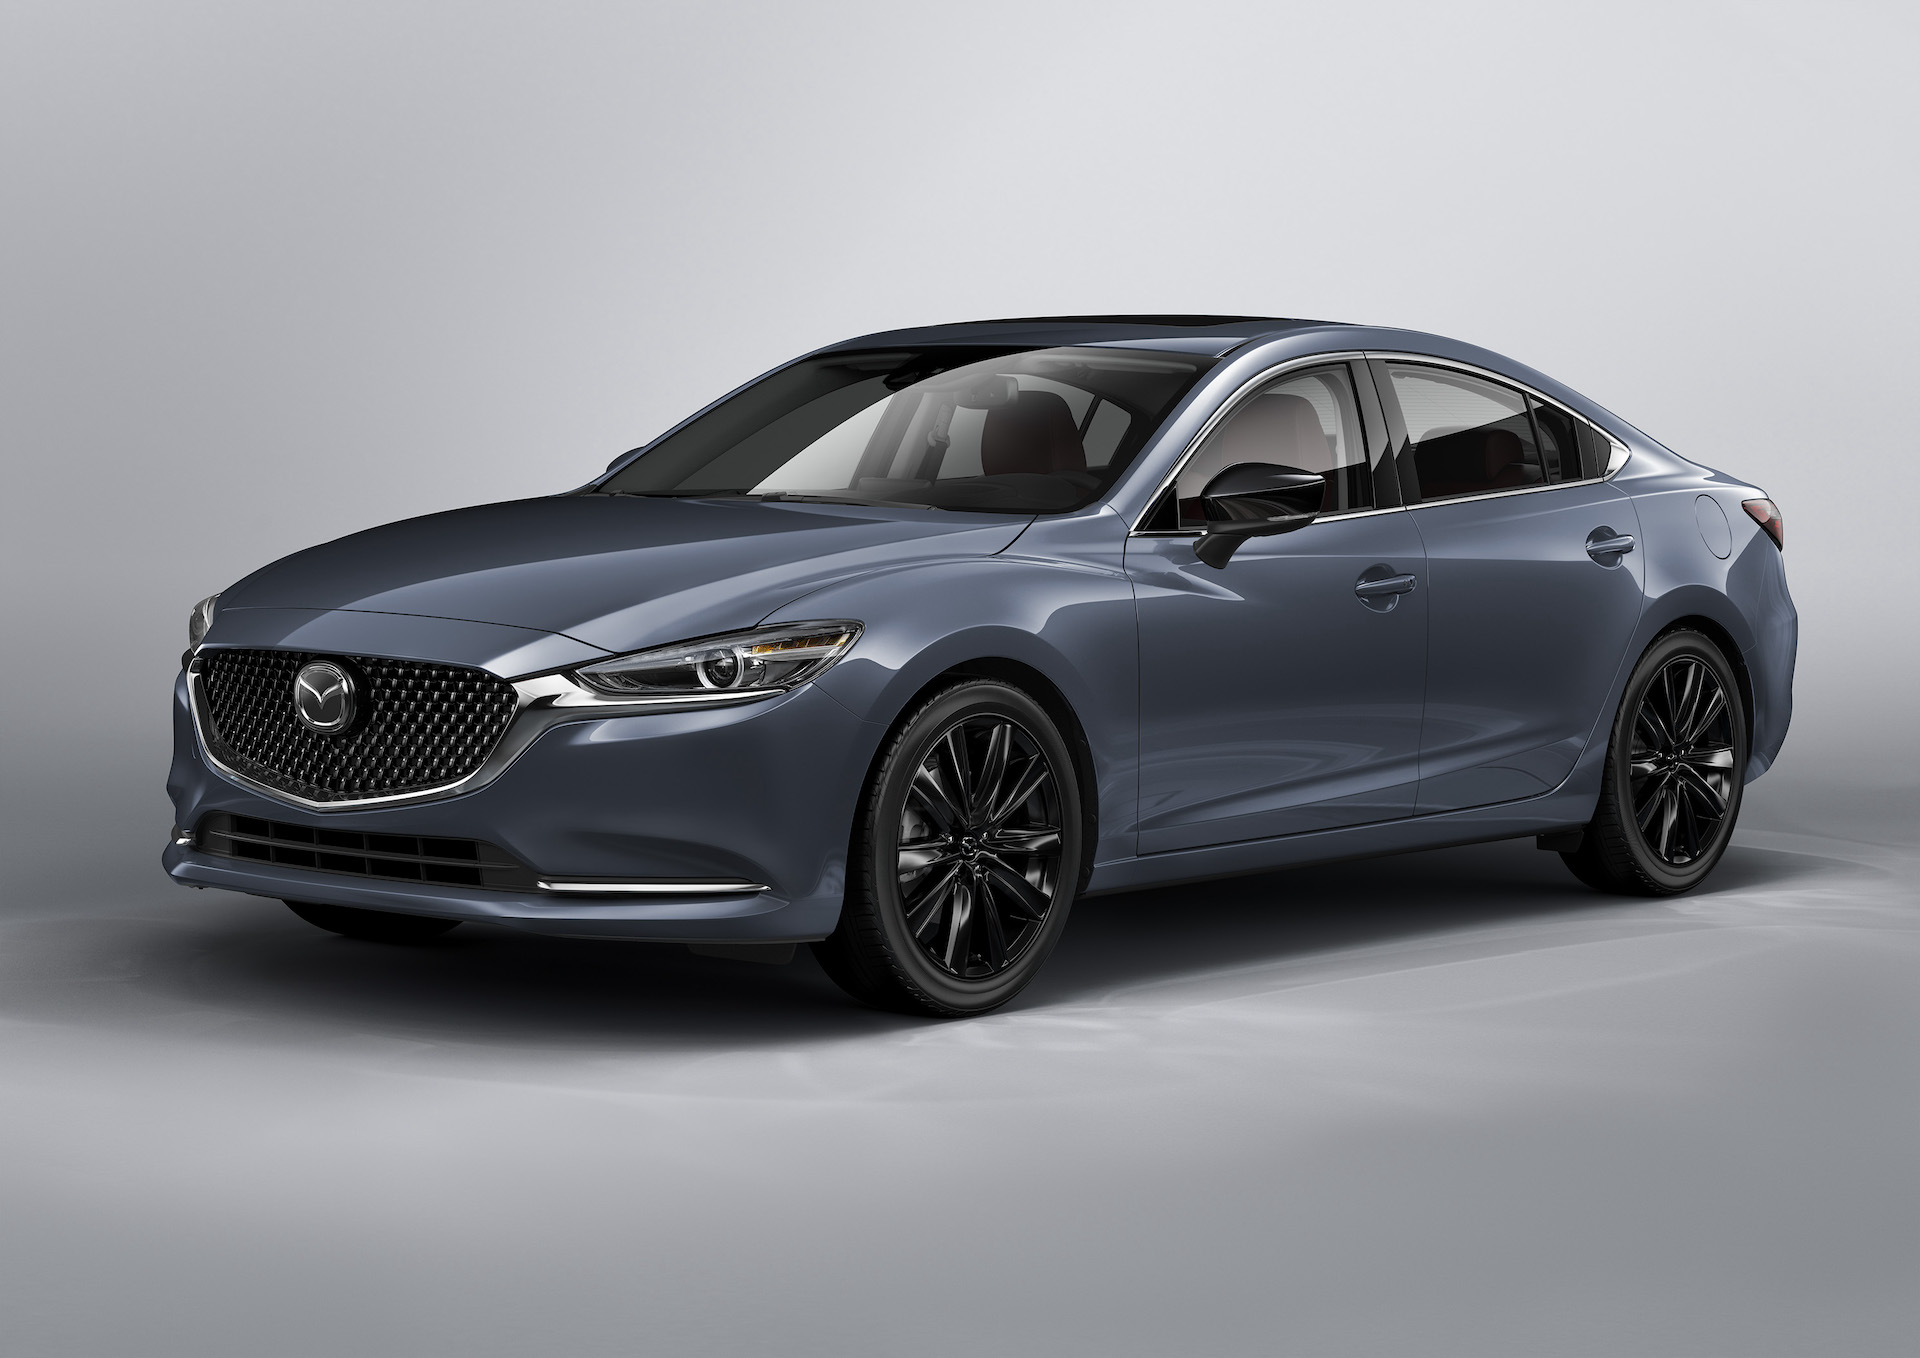 2021 Mazda MAZDA6 Review, Ratings, Specs, Prices, and Photos - The Car Connection